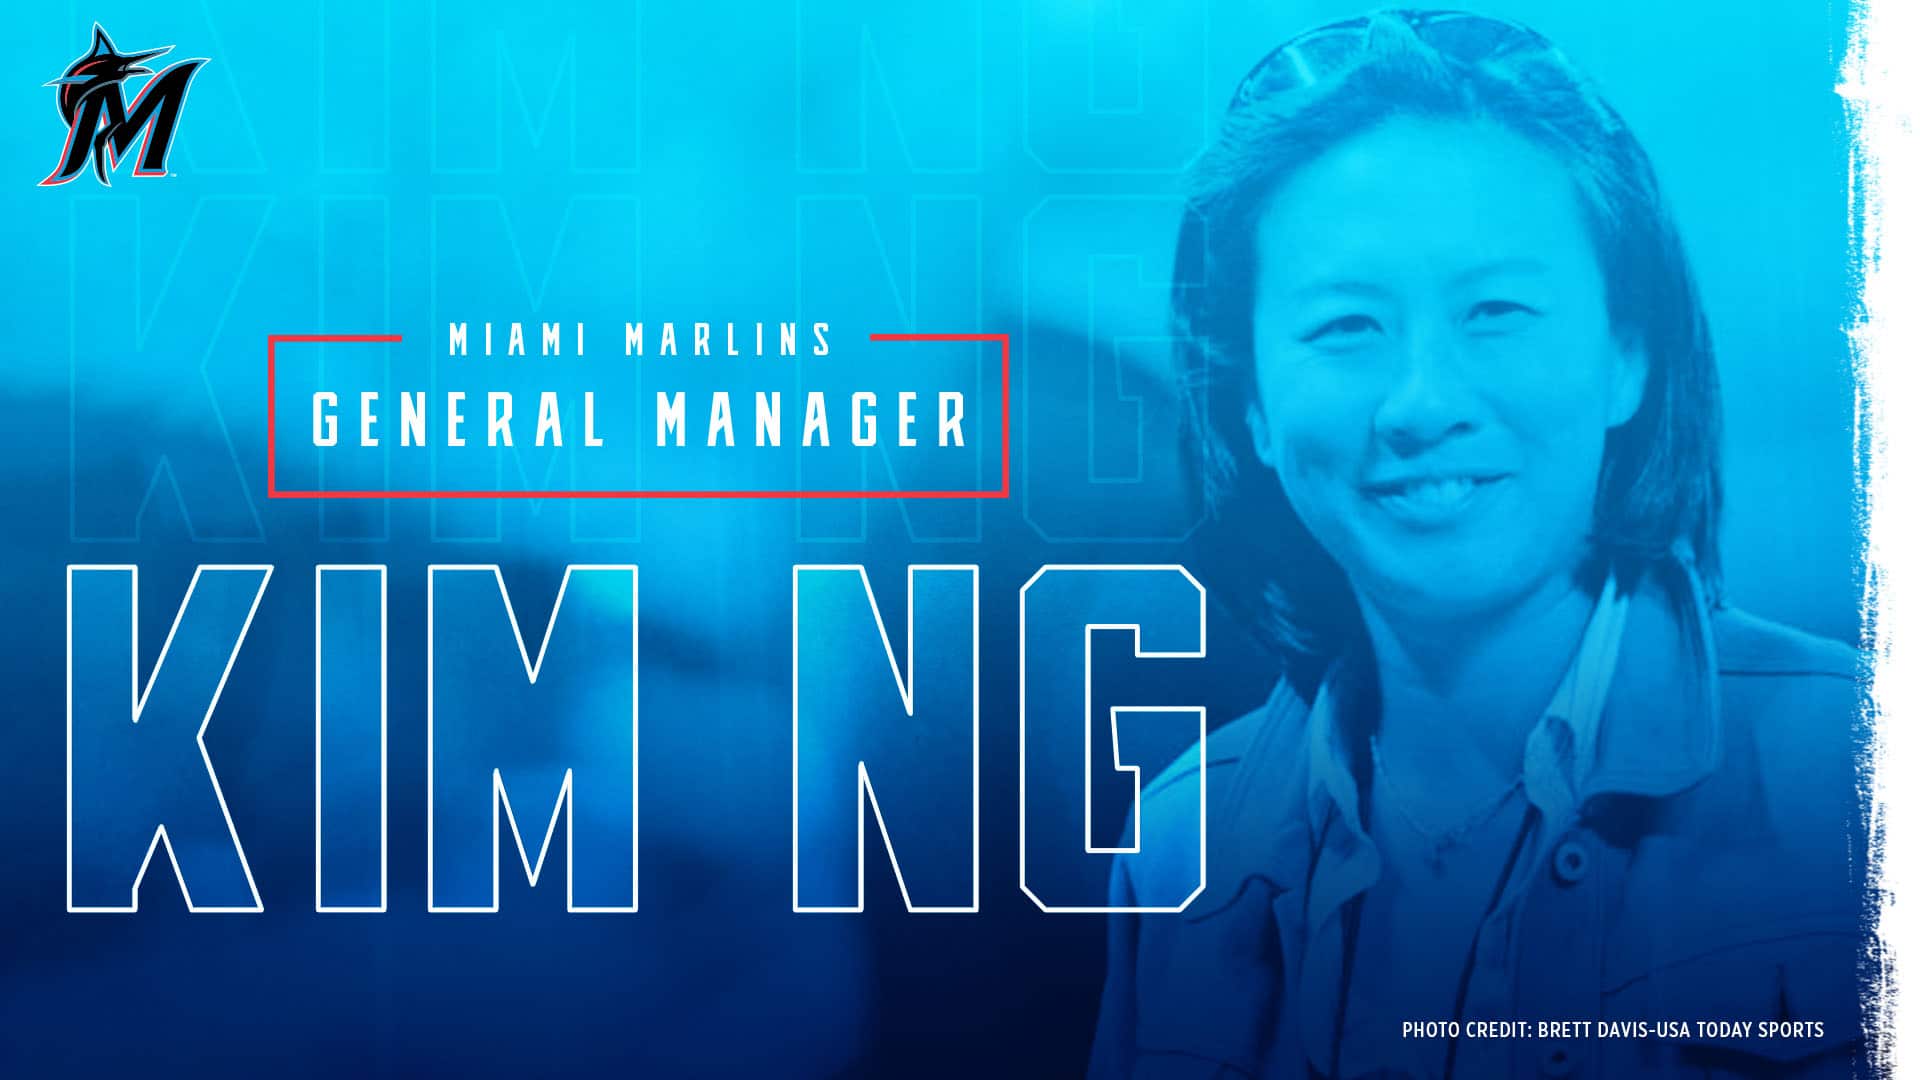 Marlins Hire Kim Ng, Who Becomes the First Female General Manager in MLB History